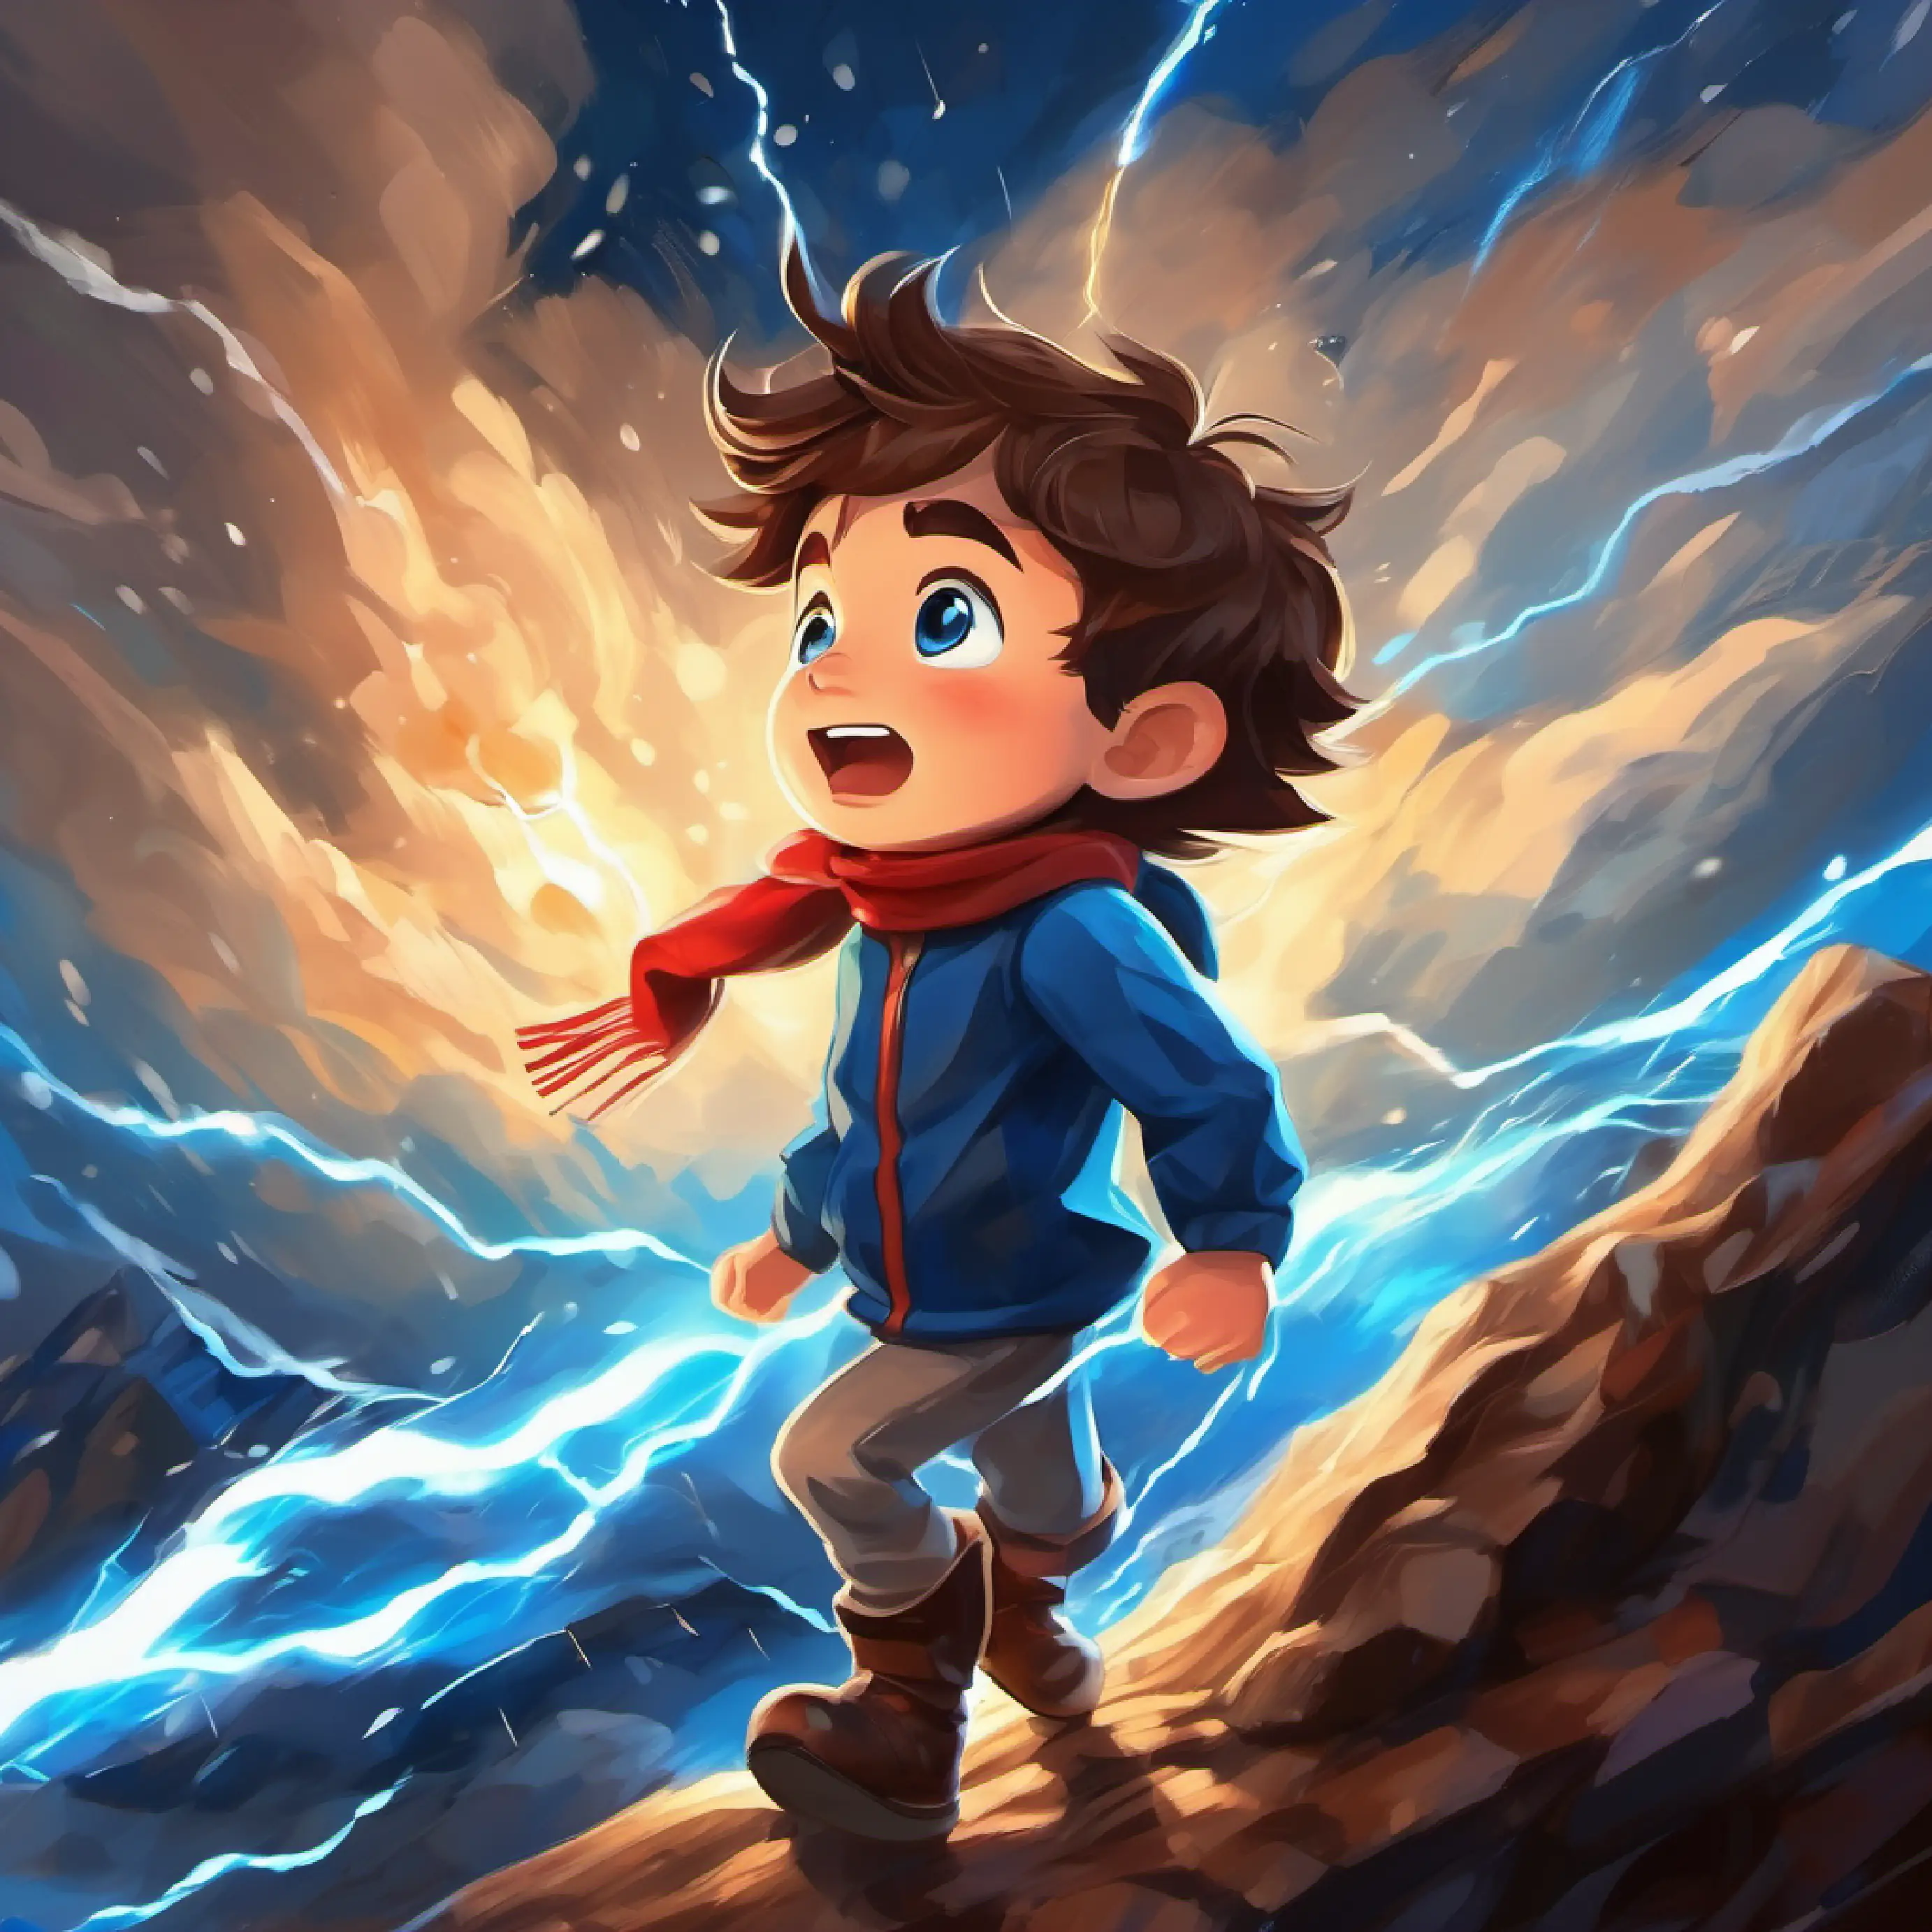 Young boy, adventurous spirit, brown hair, blue eyes feels the storm's electricity, awe striking him with each flash.